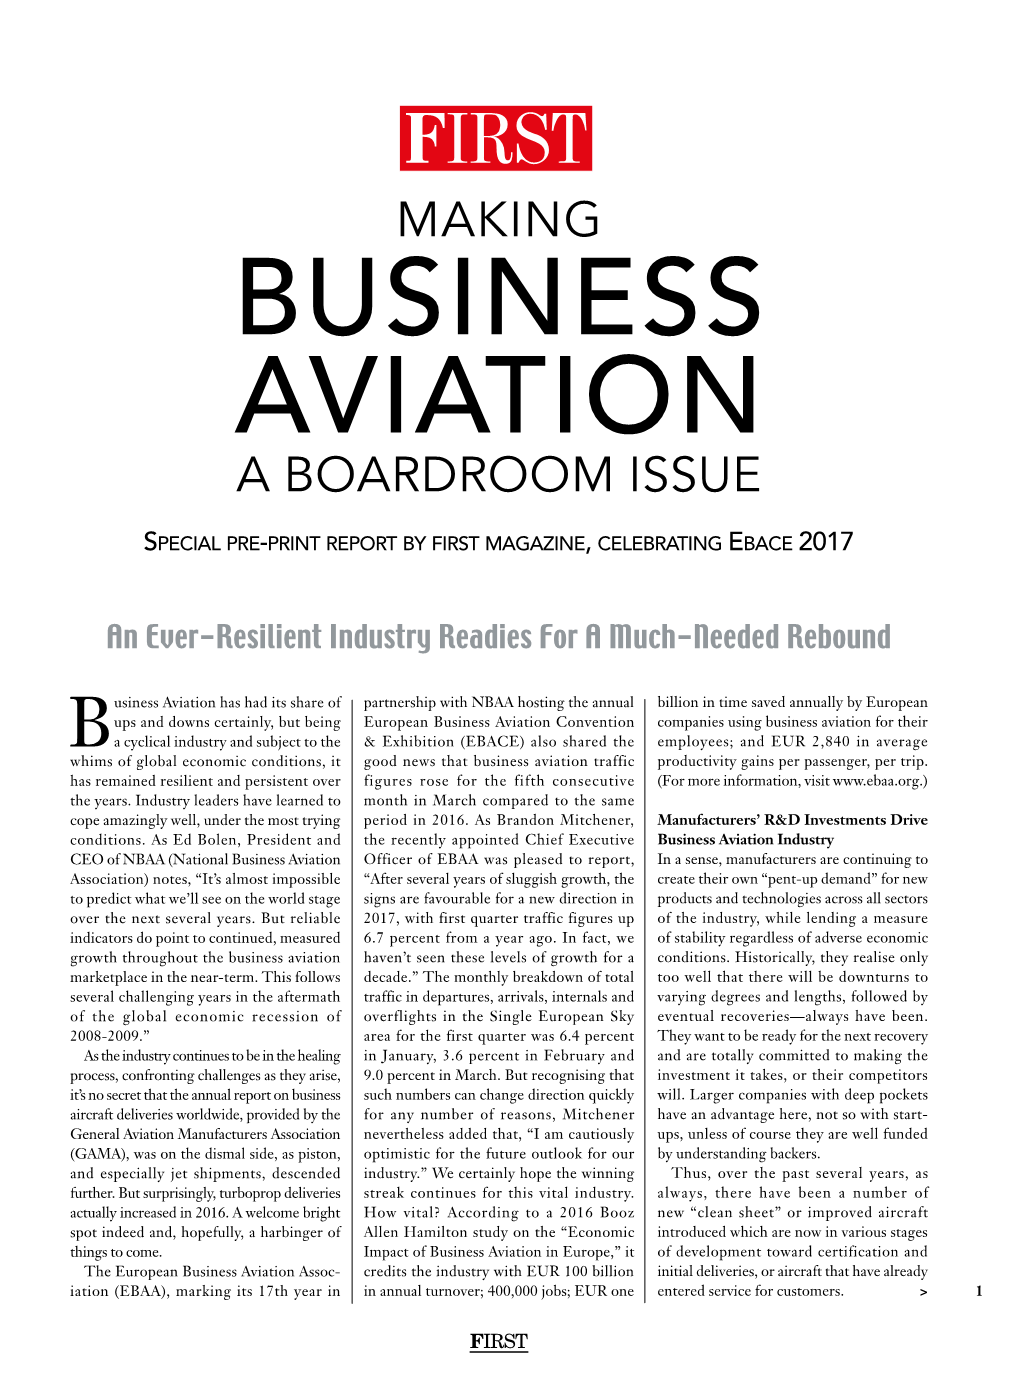 Business Aviation a Boardroom Issue